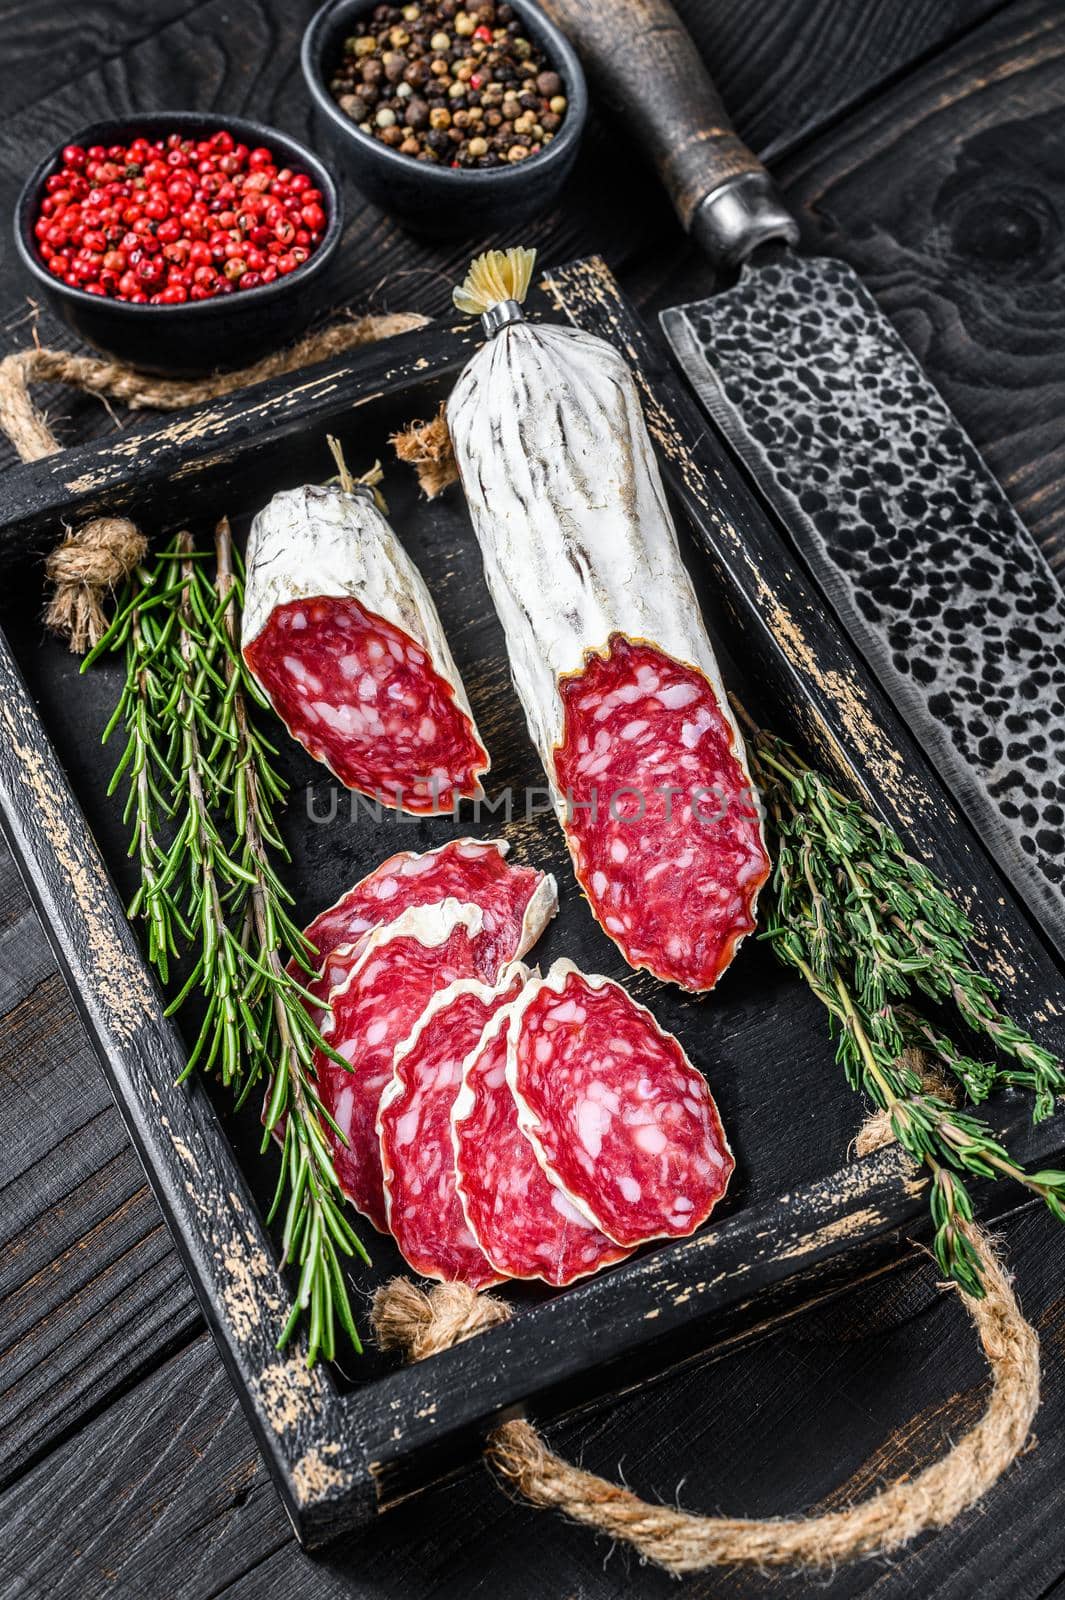 Slices of dry cured salchichon salami in a wooden tray. Black wooden background. Top view by Composter